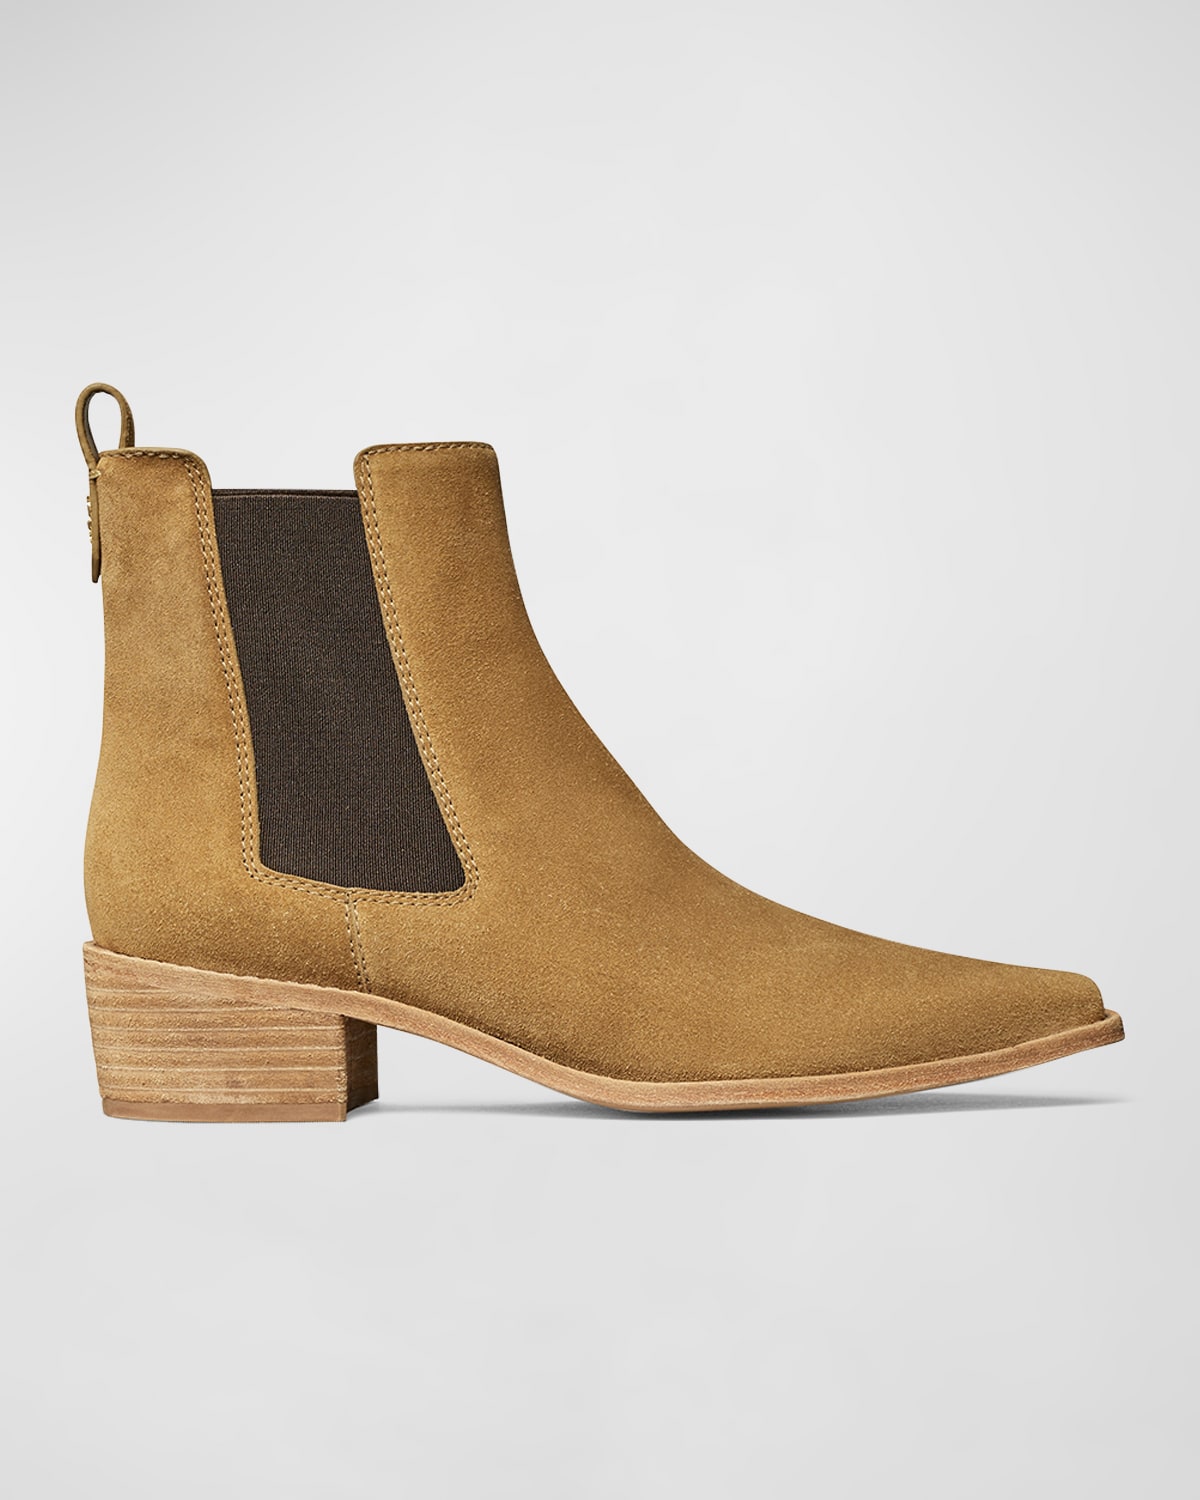 TORY BURCH SUEDE CHELSEA ANKLE BOOTS